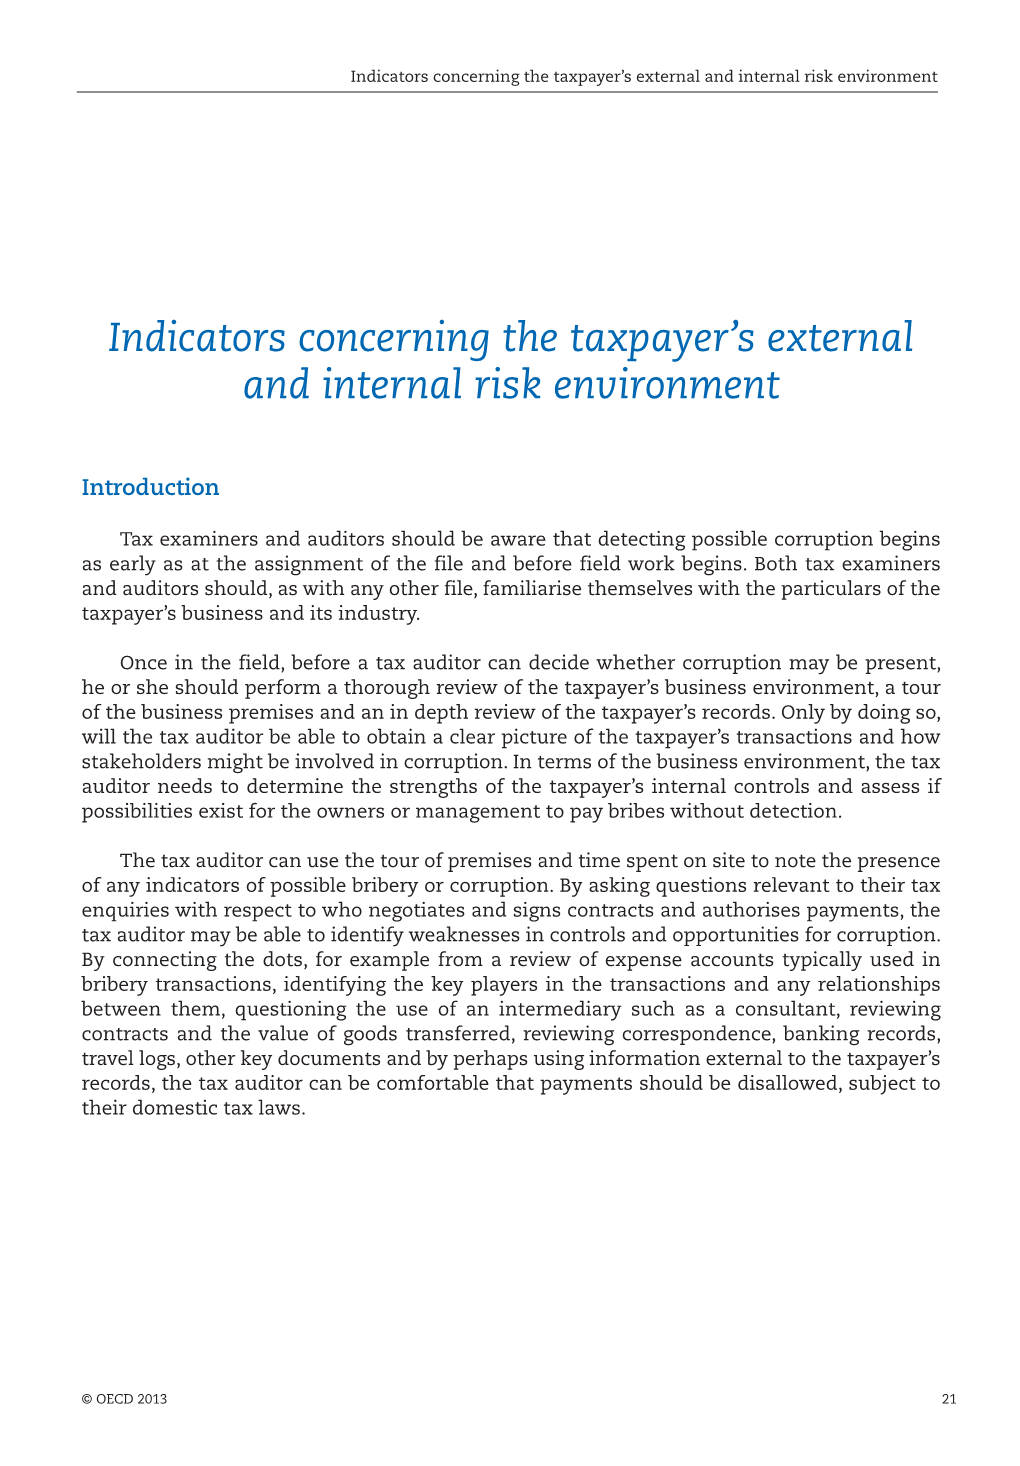 Indicators Concerning the Taxpayer's External and Internal Risk Environment